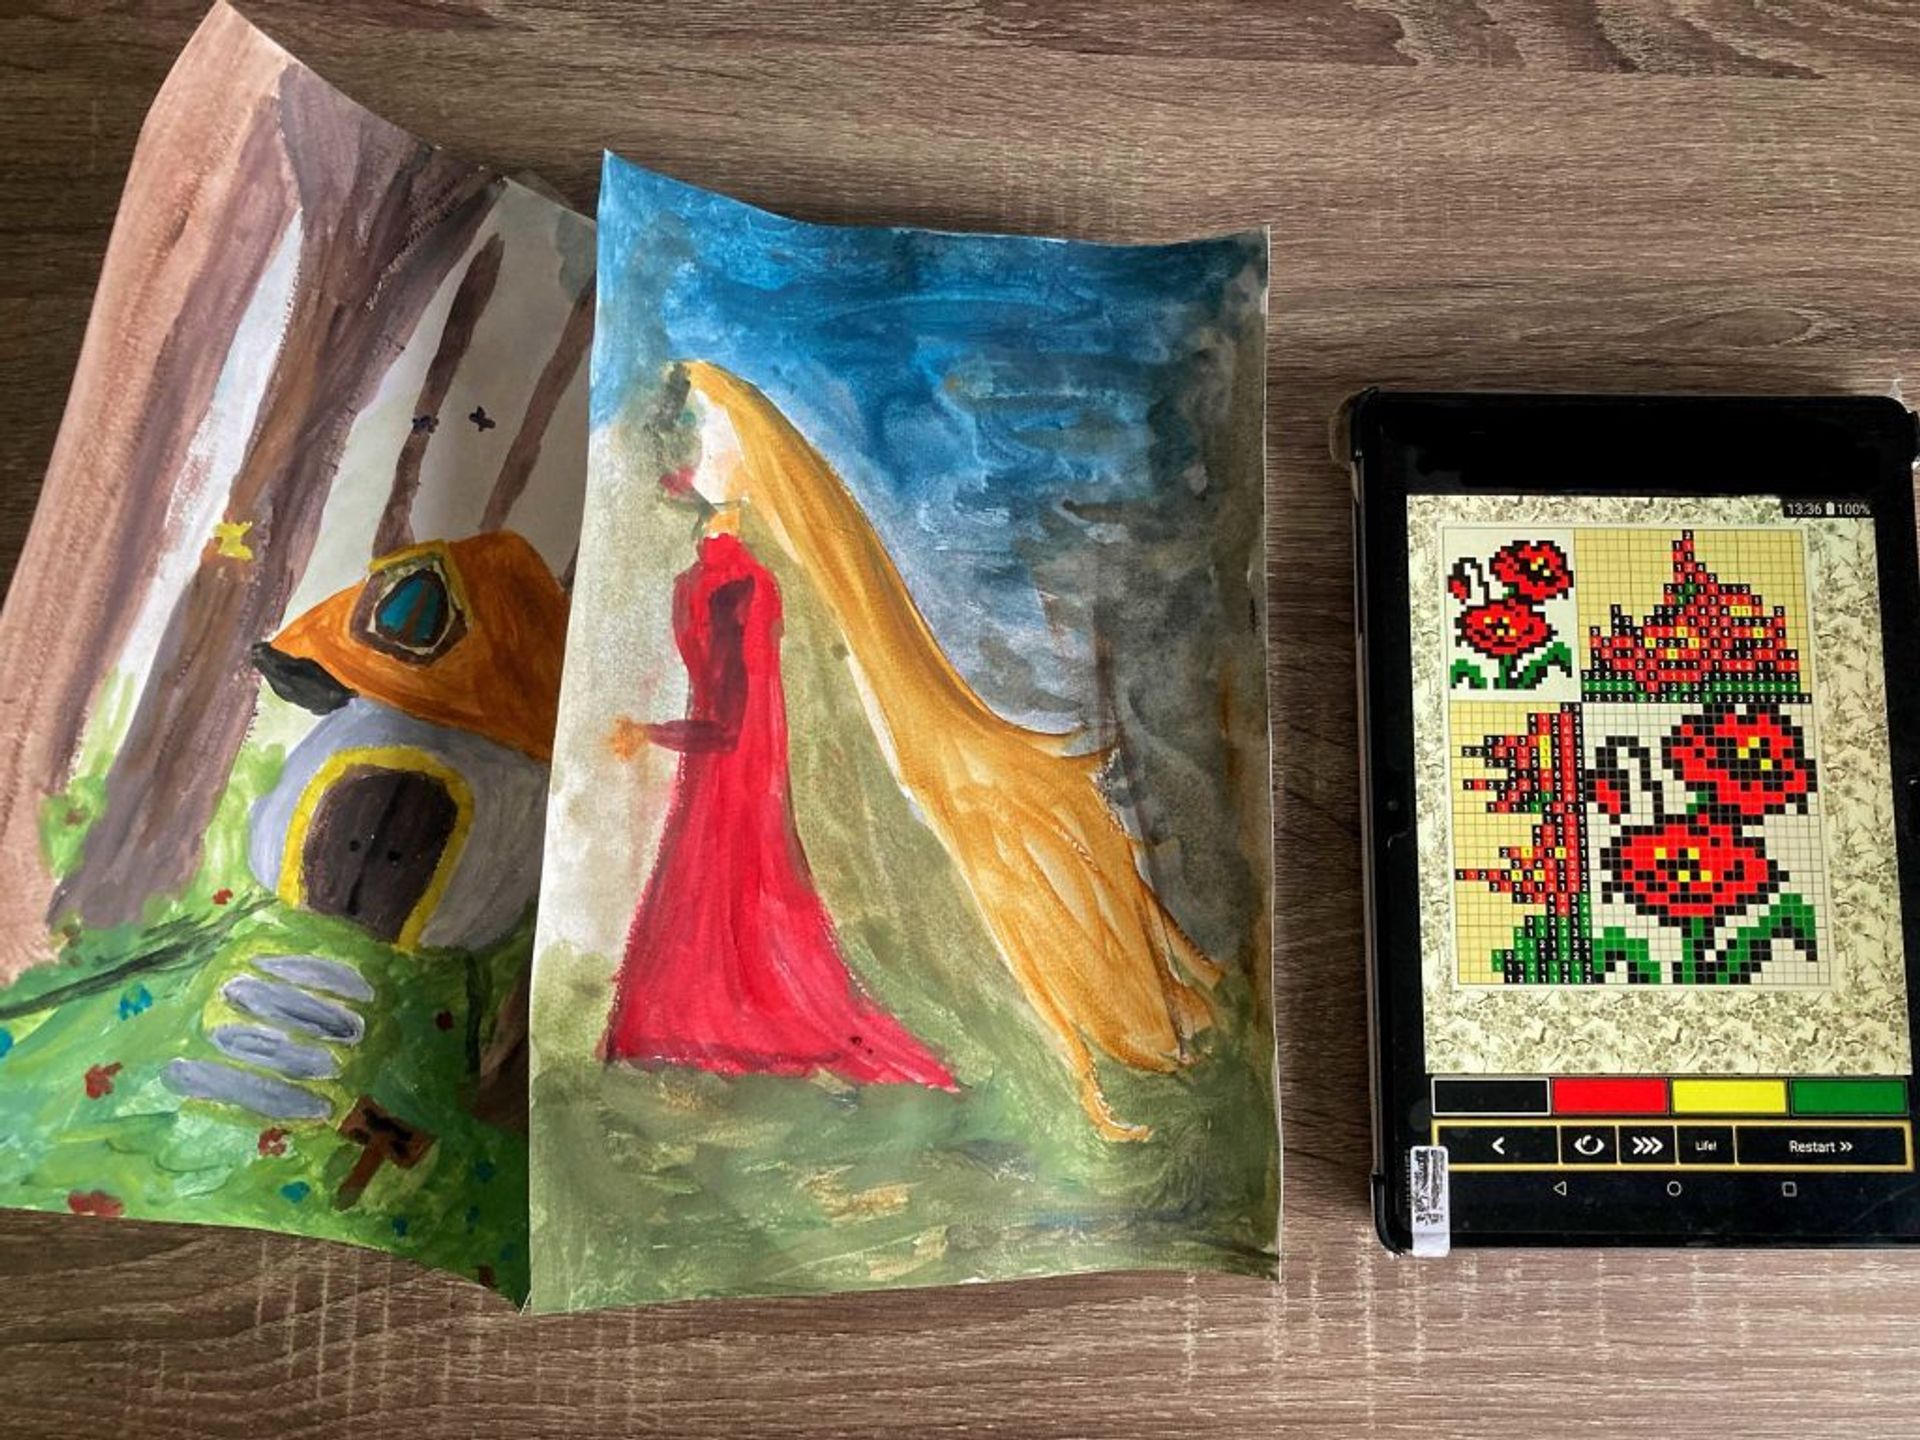 Two paintings (one of a small cottage in the woods and another one of a girl with long blonde hair) and a tablet with a nonogram. 